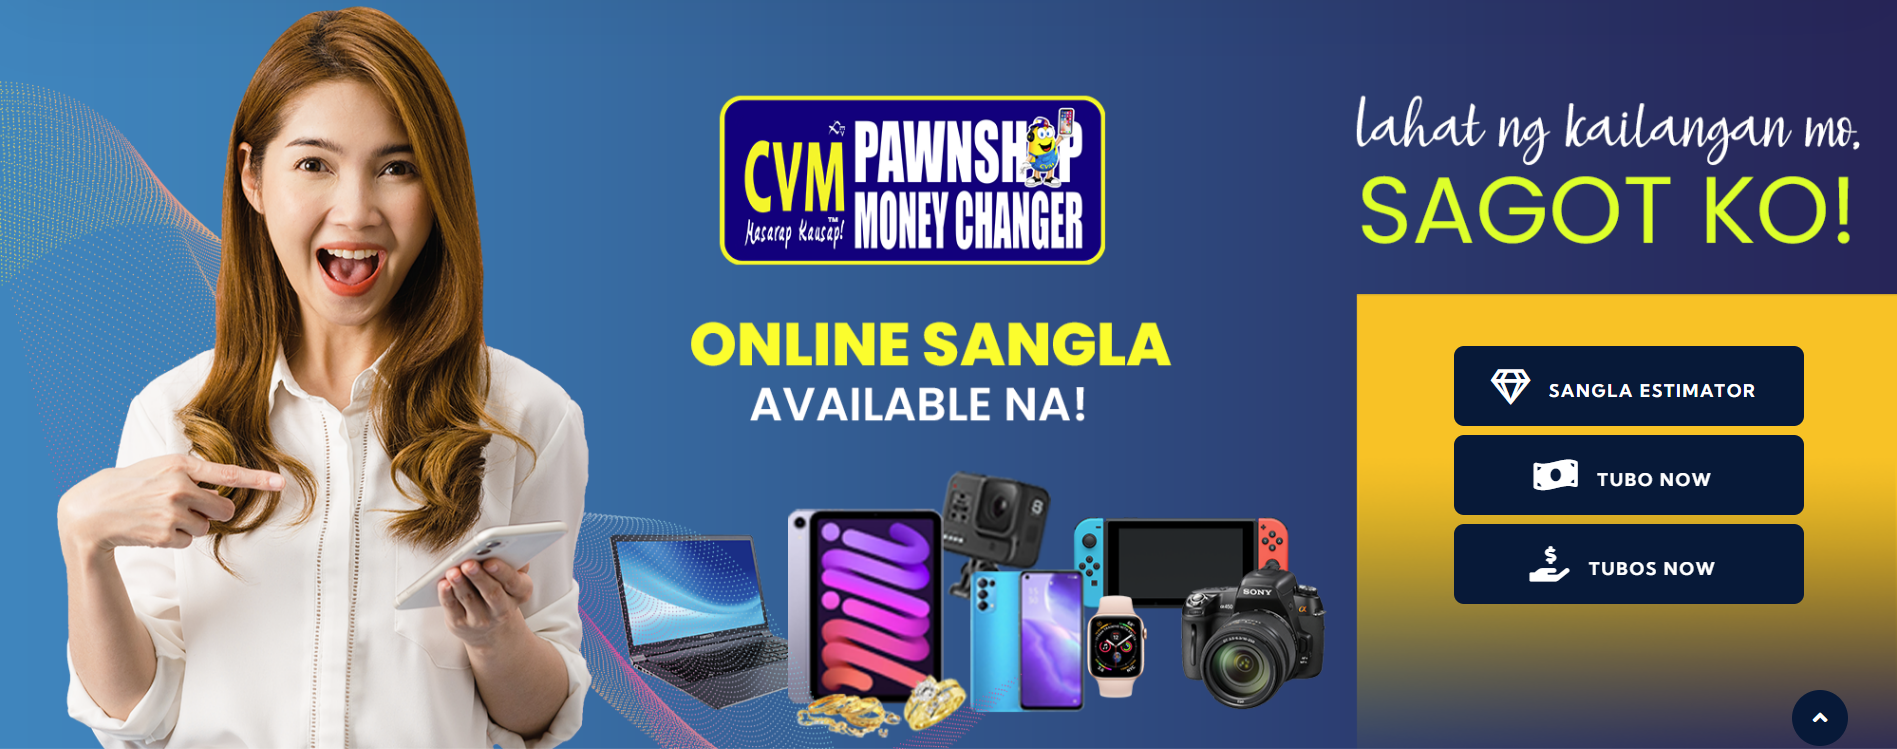 list of pawnshops in the philippines - cvm pawnshop